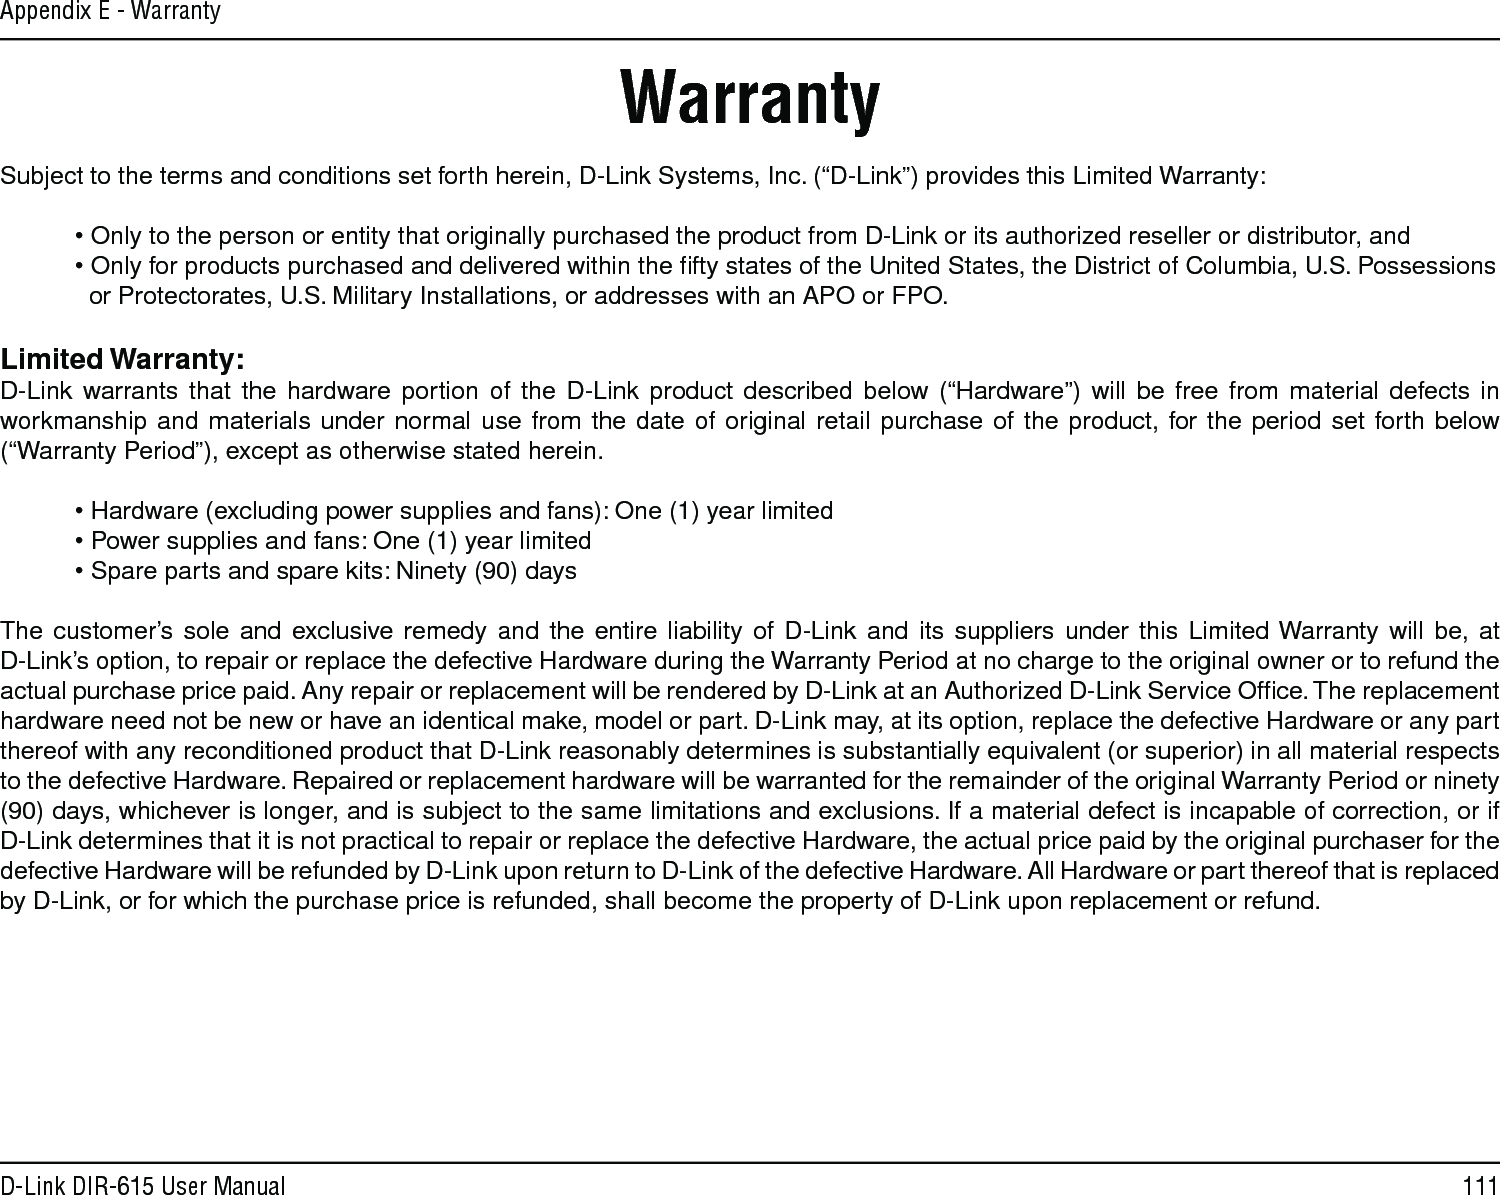 111D-Link DIR-615 User ManualAppendix E - WarrantyWarrantySubject to the terms and conditions set forth herein, D-Link Systems, Inc. (“D-Link”) provides this Limited Warranty:  • Only to the person or entity that originally purchased the product from D-Link or its authorized reseller or distributor, and  • Only for products purchased and delivered within the ﬁfty states of the United States, the District of Columbia, U.S. Possessions      or Protectorates, U.S. Military Installations, or addresses with an APO or FPO.Limited Warranty:D-Link warrants that the hardware portion of the D-Link product described below (“Hardware”) will be free from material  defects in workmanship and materials under normal use from the date of original retail purchase of the product, for the period set forth below (“Warranty Period”), except as otherwise stated herein.  • Hardware (excluding power supplies and fans): One (1) year limited  • Power supplies and fans: One (1) year limited  • Spare parts and spare kits: Ninety (90) daysThe customer’s sole and exclusive remedy  and  the  entire  liability  of  D-Link  and  its  suppliers  under  this  Limited Warranty will be, at  D-Link’s option, to repair or replace the defective Hardware during the Warranty Period at no charge to the original owner or to refund the actual purchase price paid. Any repair or replacement will be rendered by D-Link at an Authorized D-Link Service Ofﬁce. The replacement hardware need not be new or have an identical make, model or part. D-Link may, at its option, replace the defective Hardware or any part thereof with any reconditioned product that D-Link reasonably determines is substantially equivalent (or superior) in all material respects to the defective Hardware. Repaired or replacement hardware will be warranted for the remainder of the original Warranty Period or ninety (90) days, whichever is longer, and is subject to the same limitations and exclusions. If a material defect is incapable of correction, or if D-Link determines that it is not practical to repair or replace the defective Hardware, the actual price paid by the original purchaser for the defective Hardware will be refunded by D-Link upon return to D-Link of the defective Hardware. All Hardware or part thereof that is replaced by D-Link, or for which the purchase price is refunded, shall become the property of D-Link upon replacement or refund.